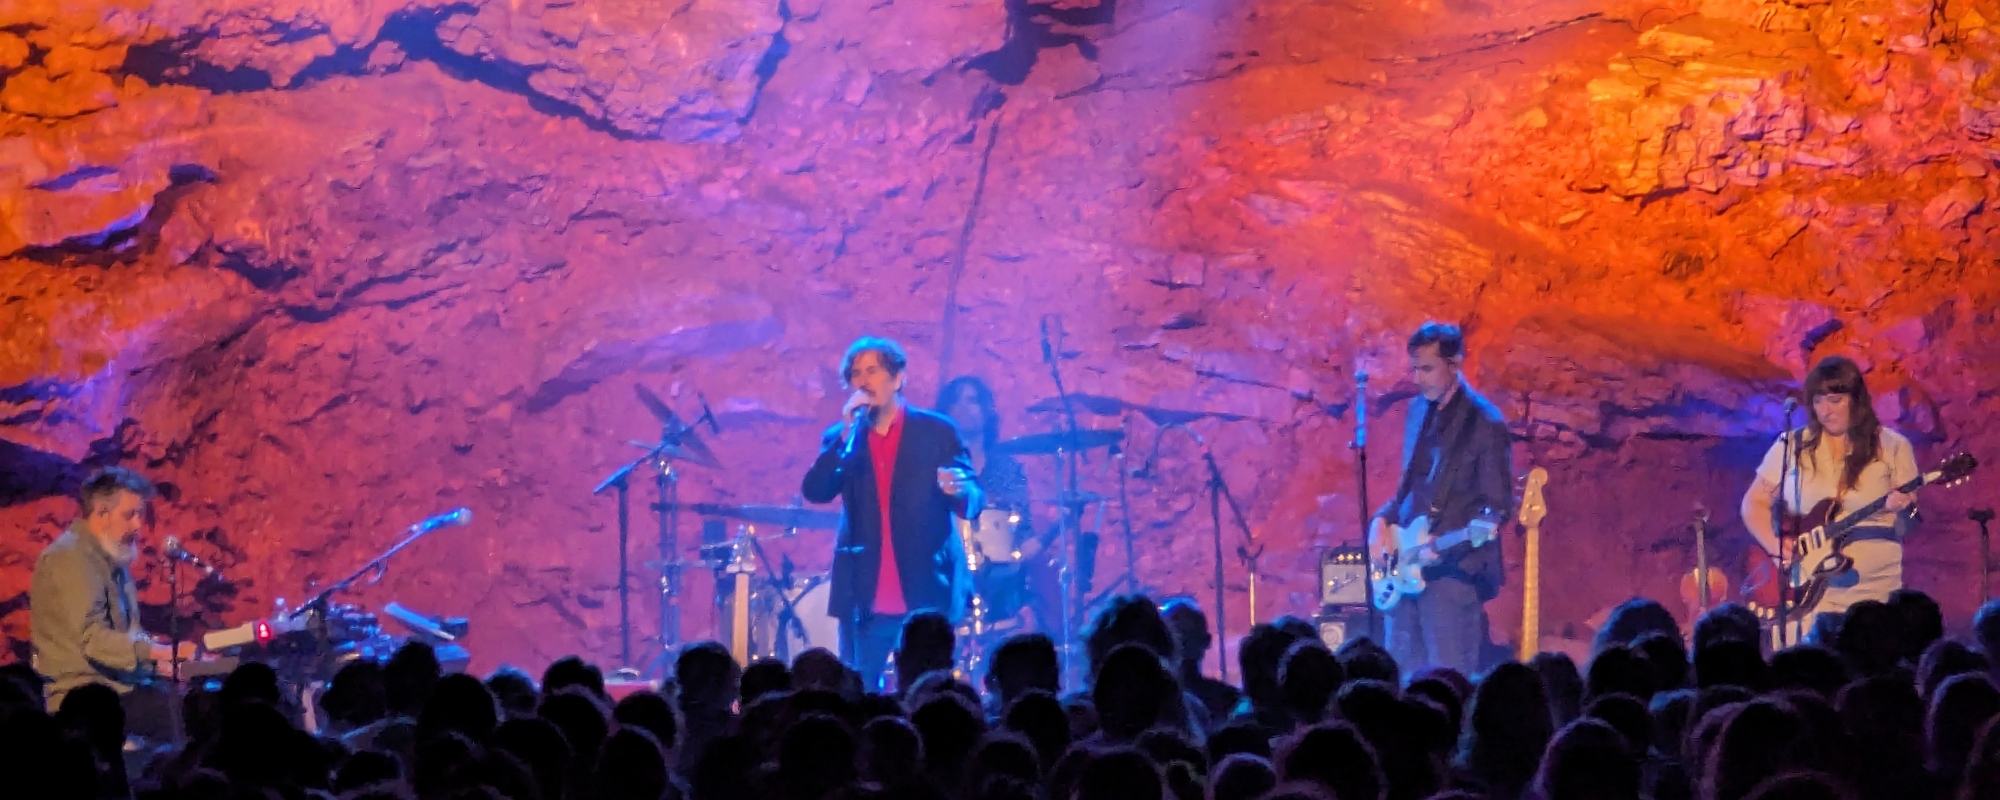 The Mountain Goats Find a Unique Home at The Caverns for Their One-of-a-Kind Sound